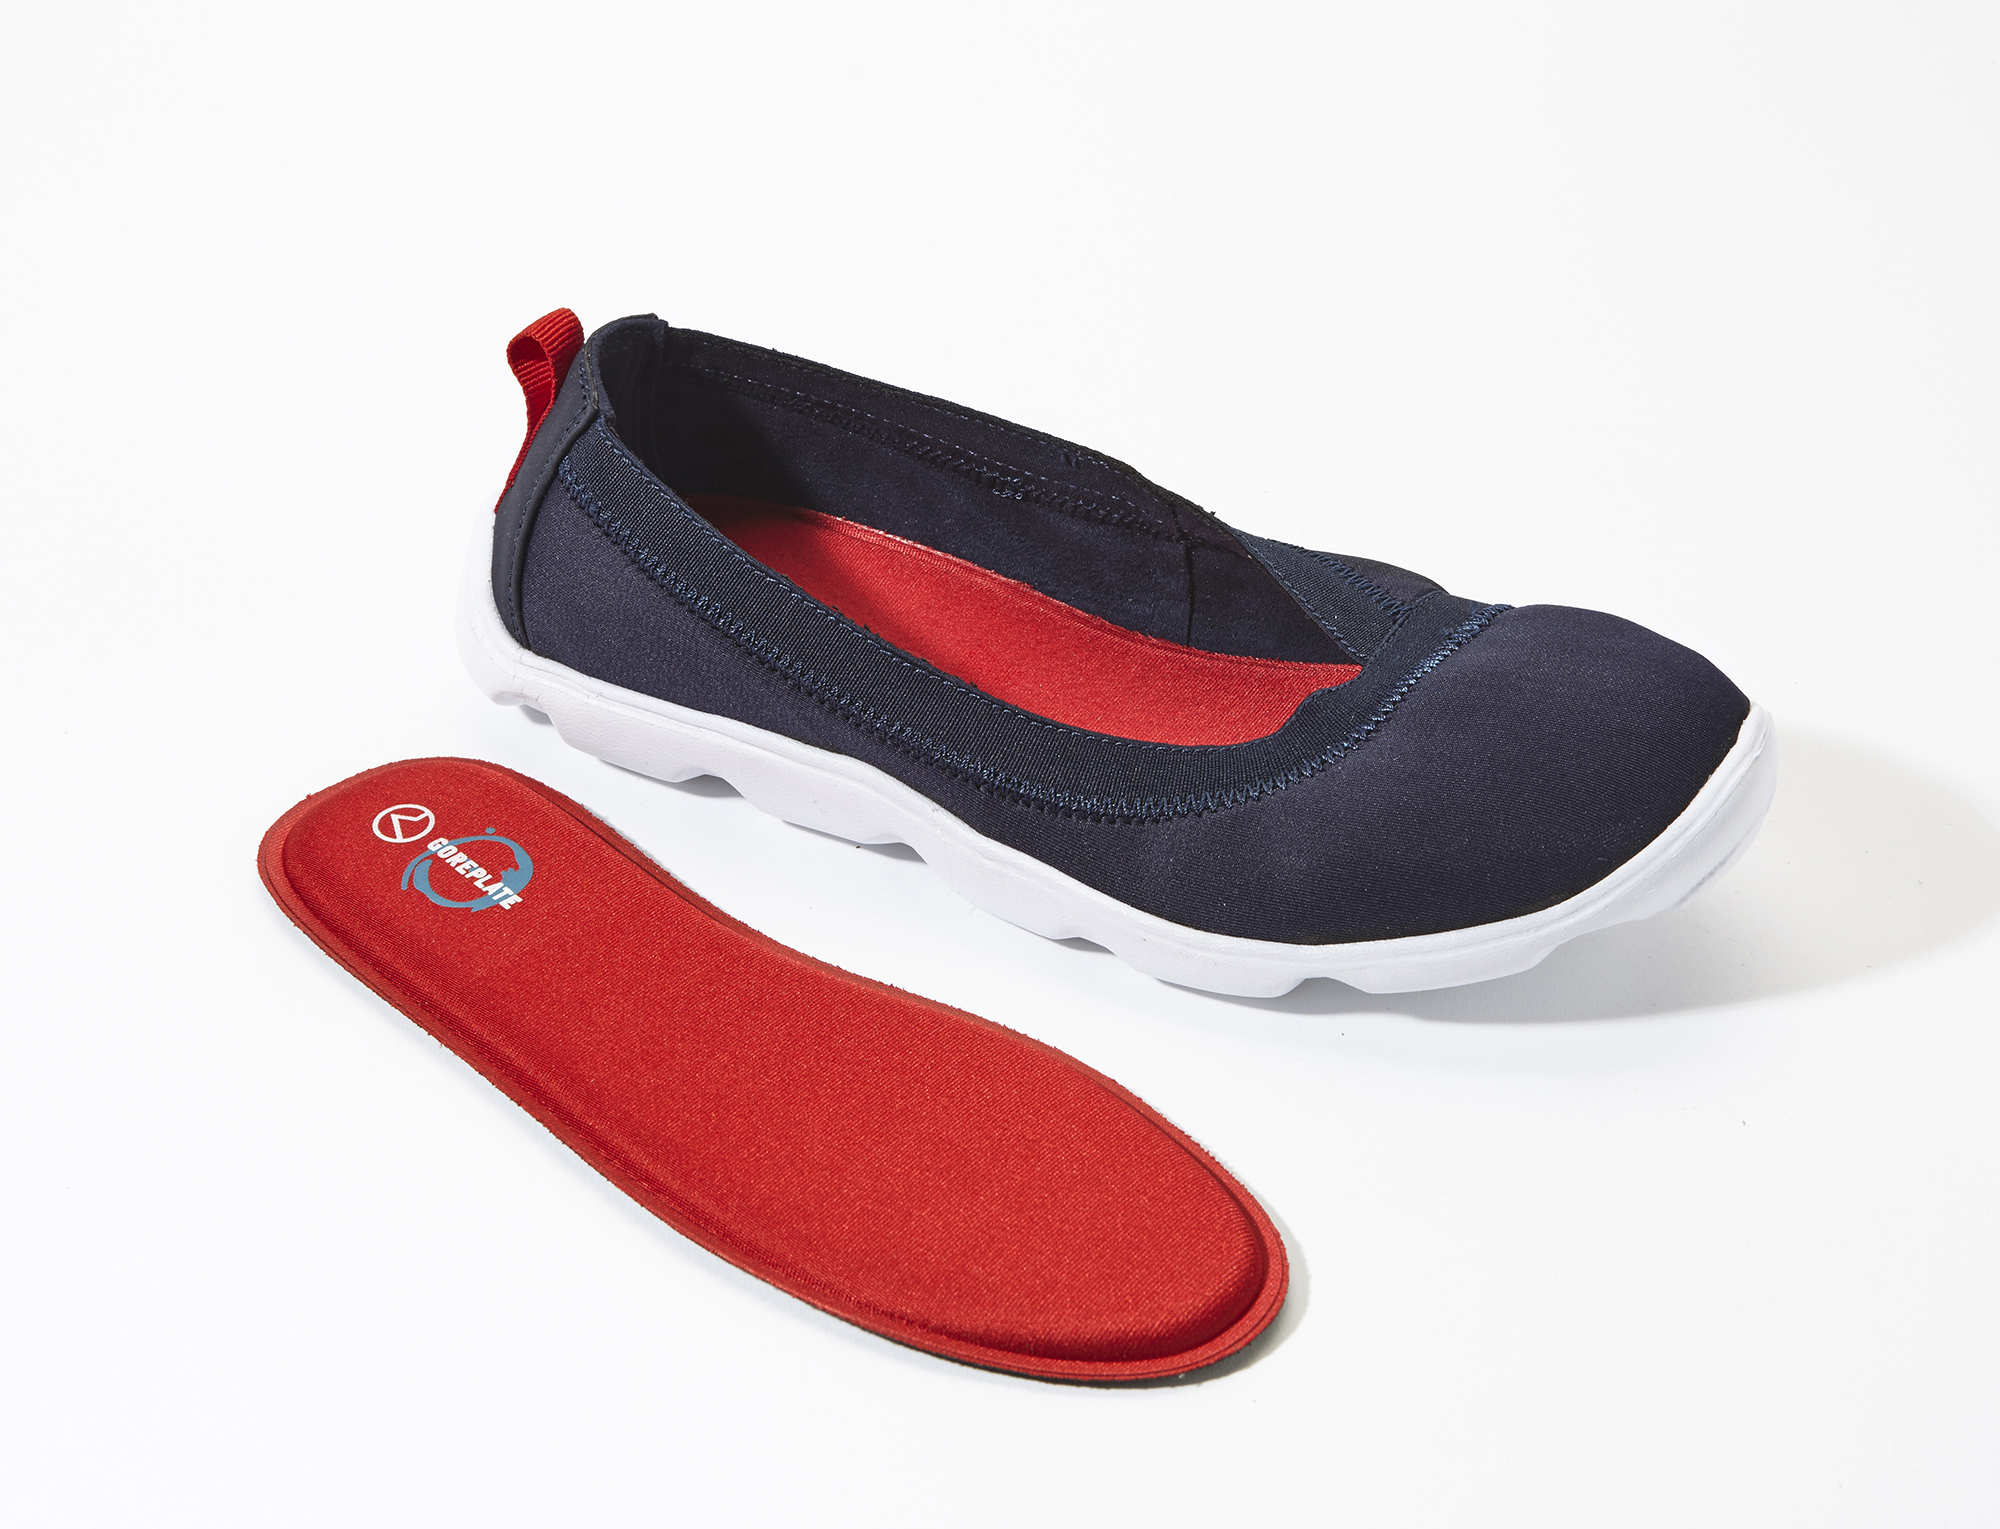 MEMORY FORM INSOLE